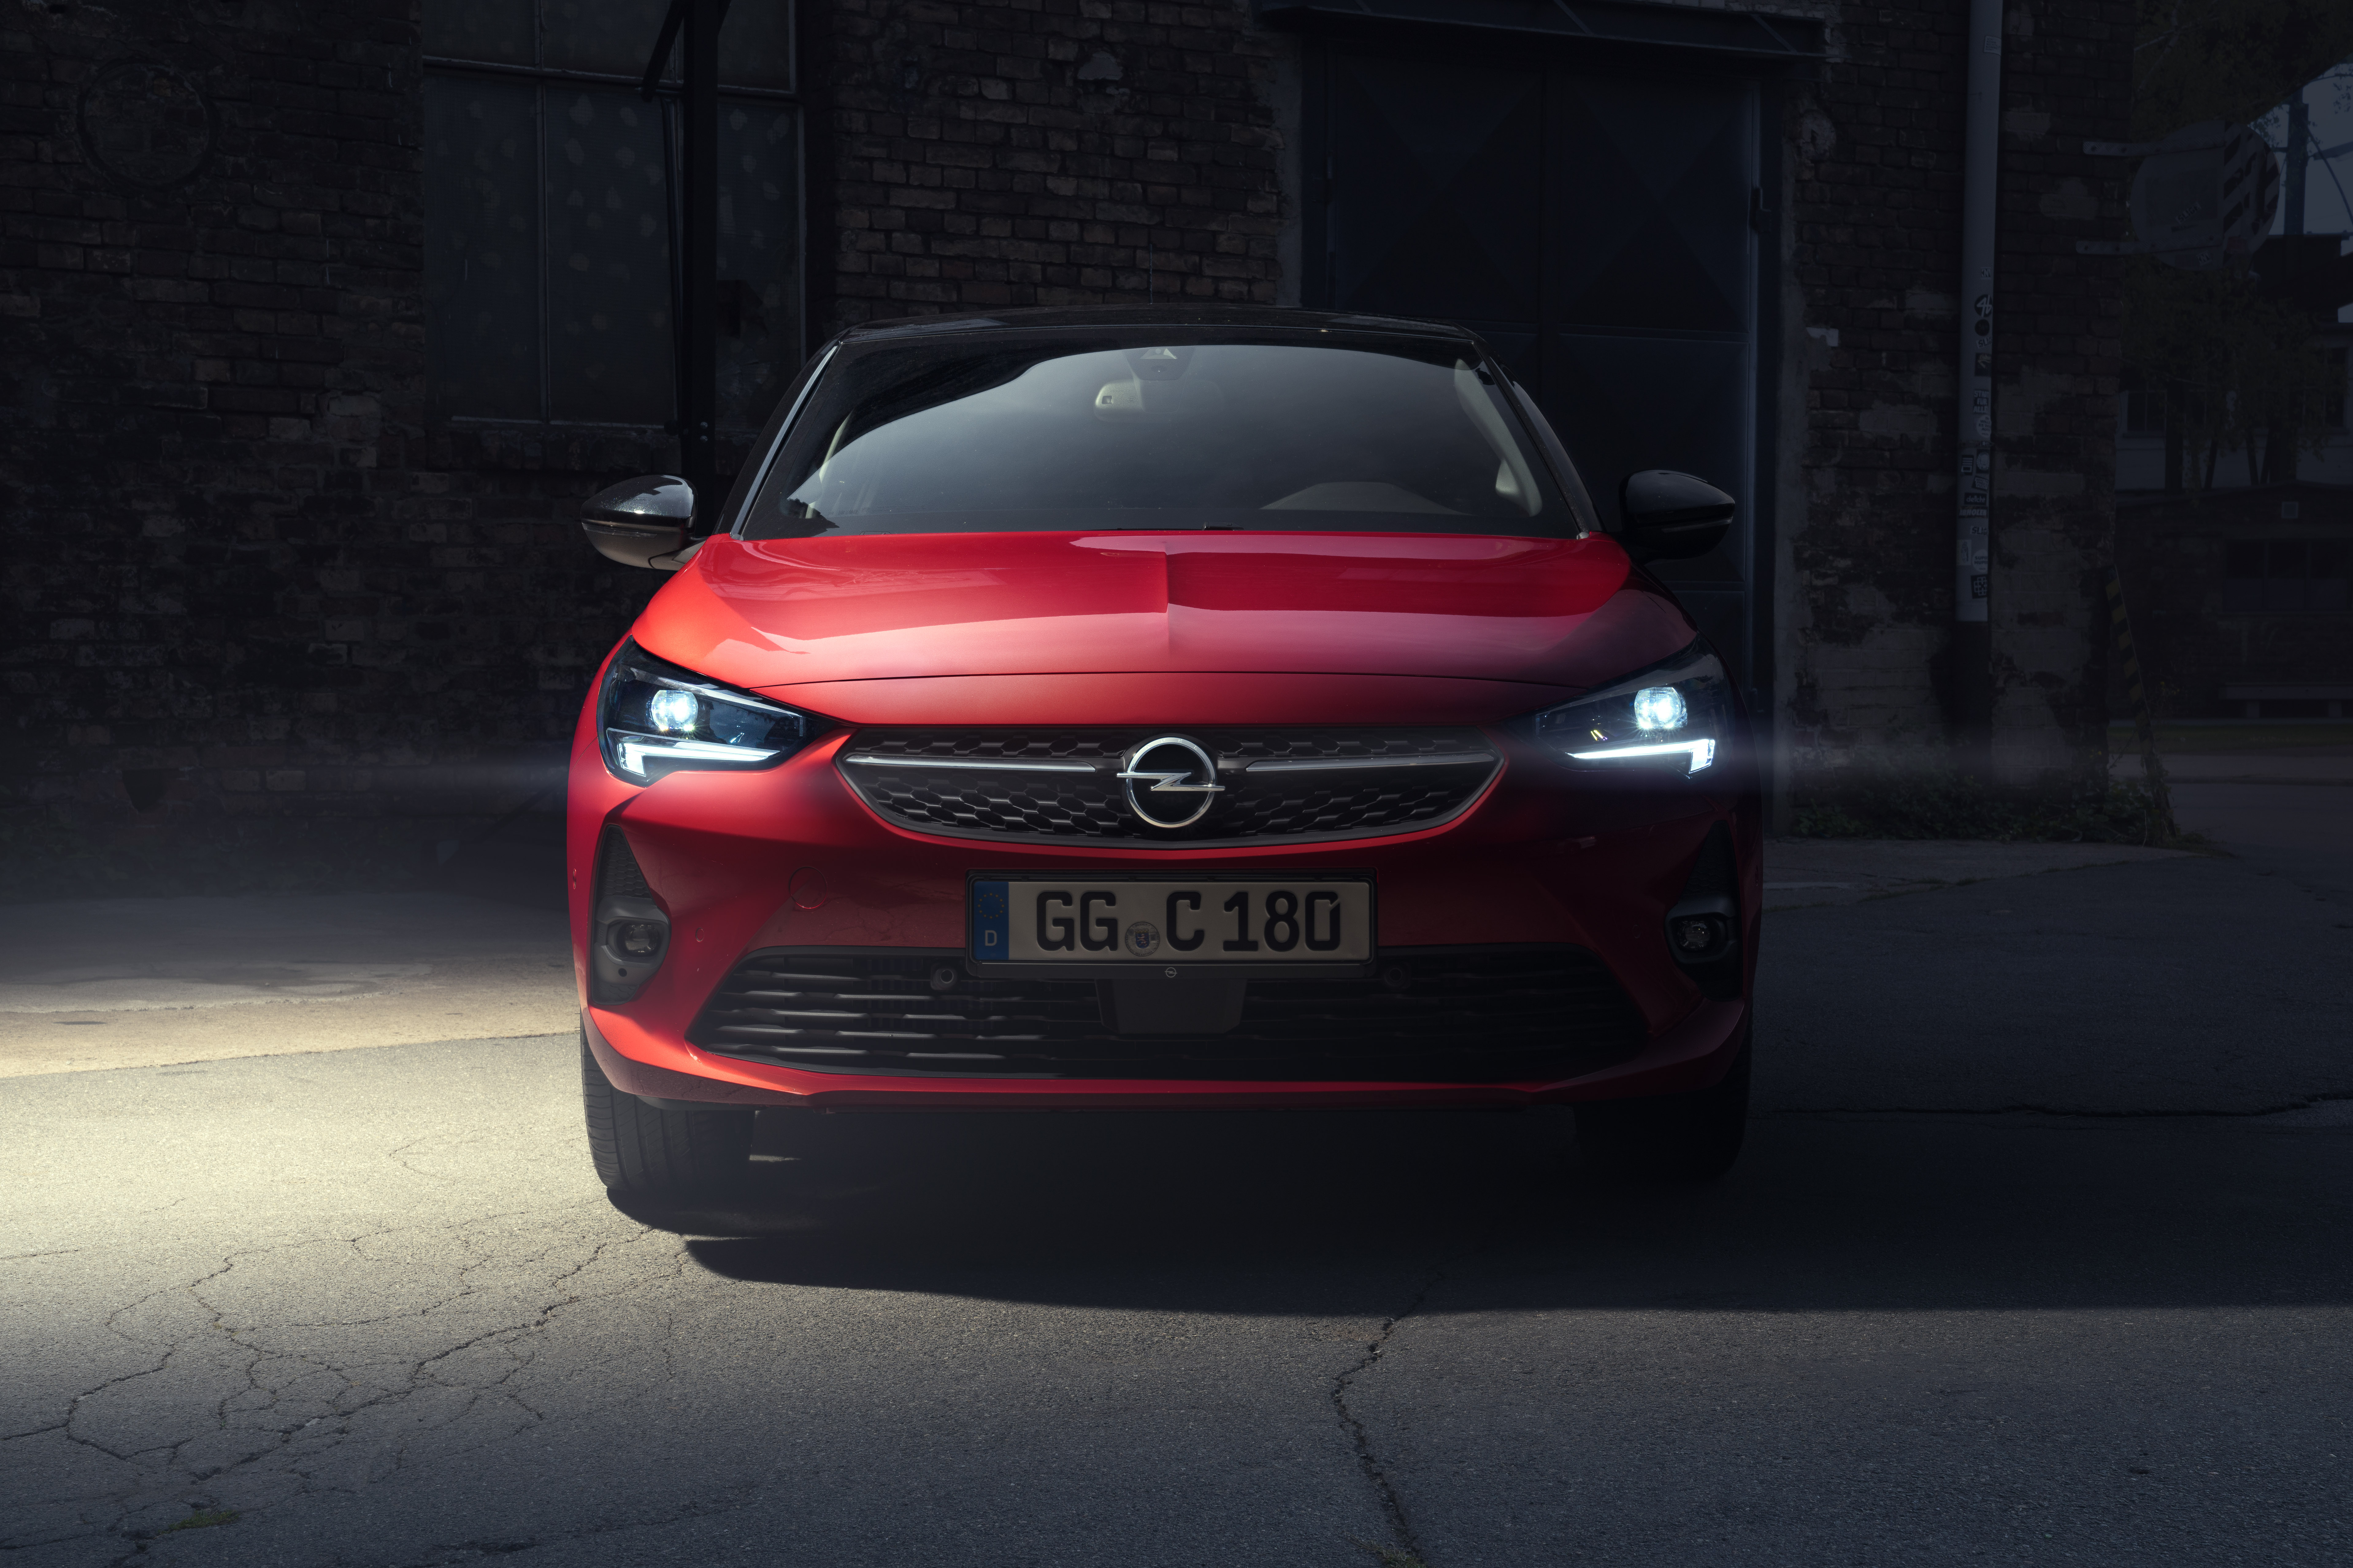 2020 Opel Corsa Debuts With Up To 130 Horsepower